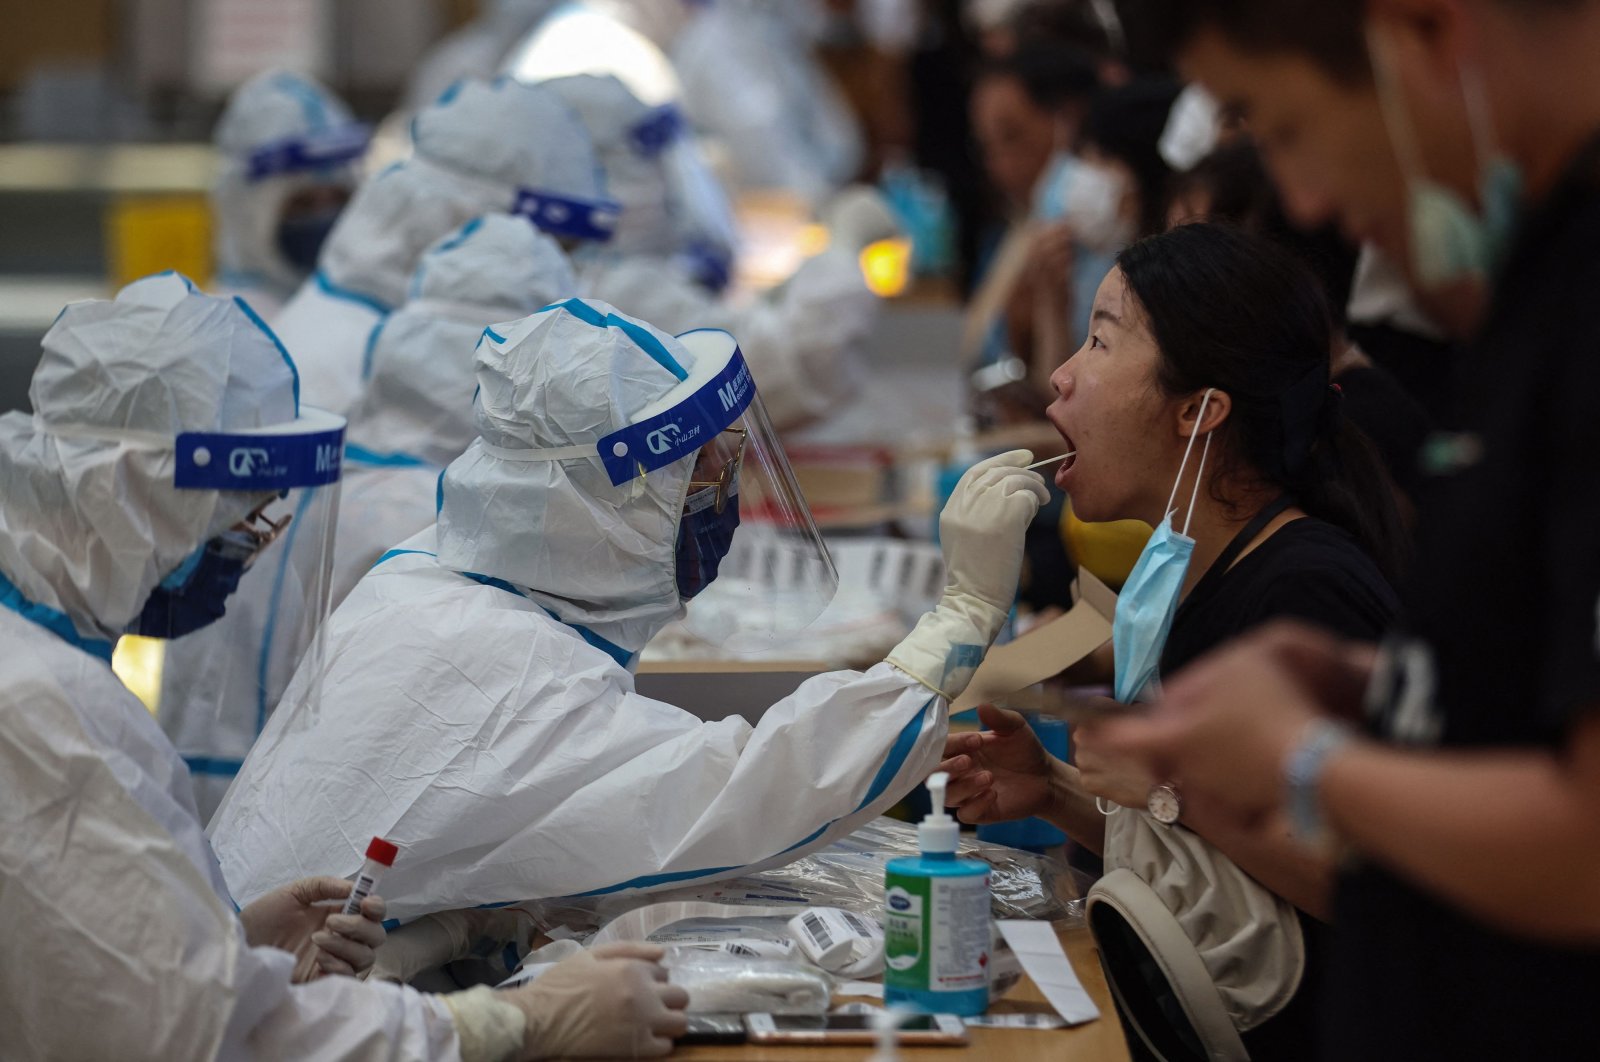 A resident receives a nucleic acid test for the COVID-19 coronavirus in Nanjing, eastern Jiangsu province, China, July 21, 2021. (AFP Photo)